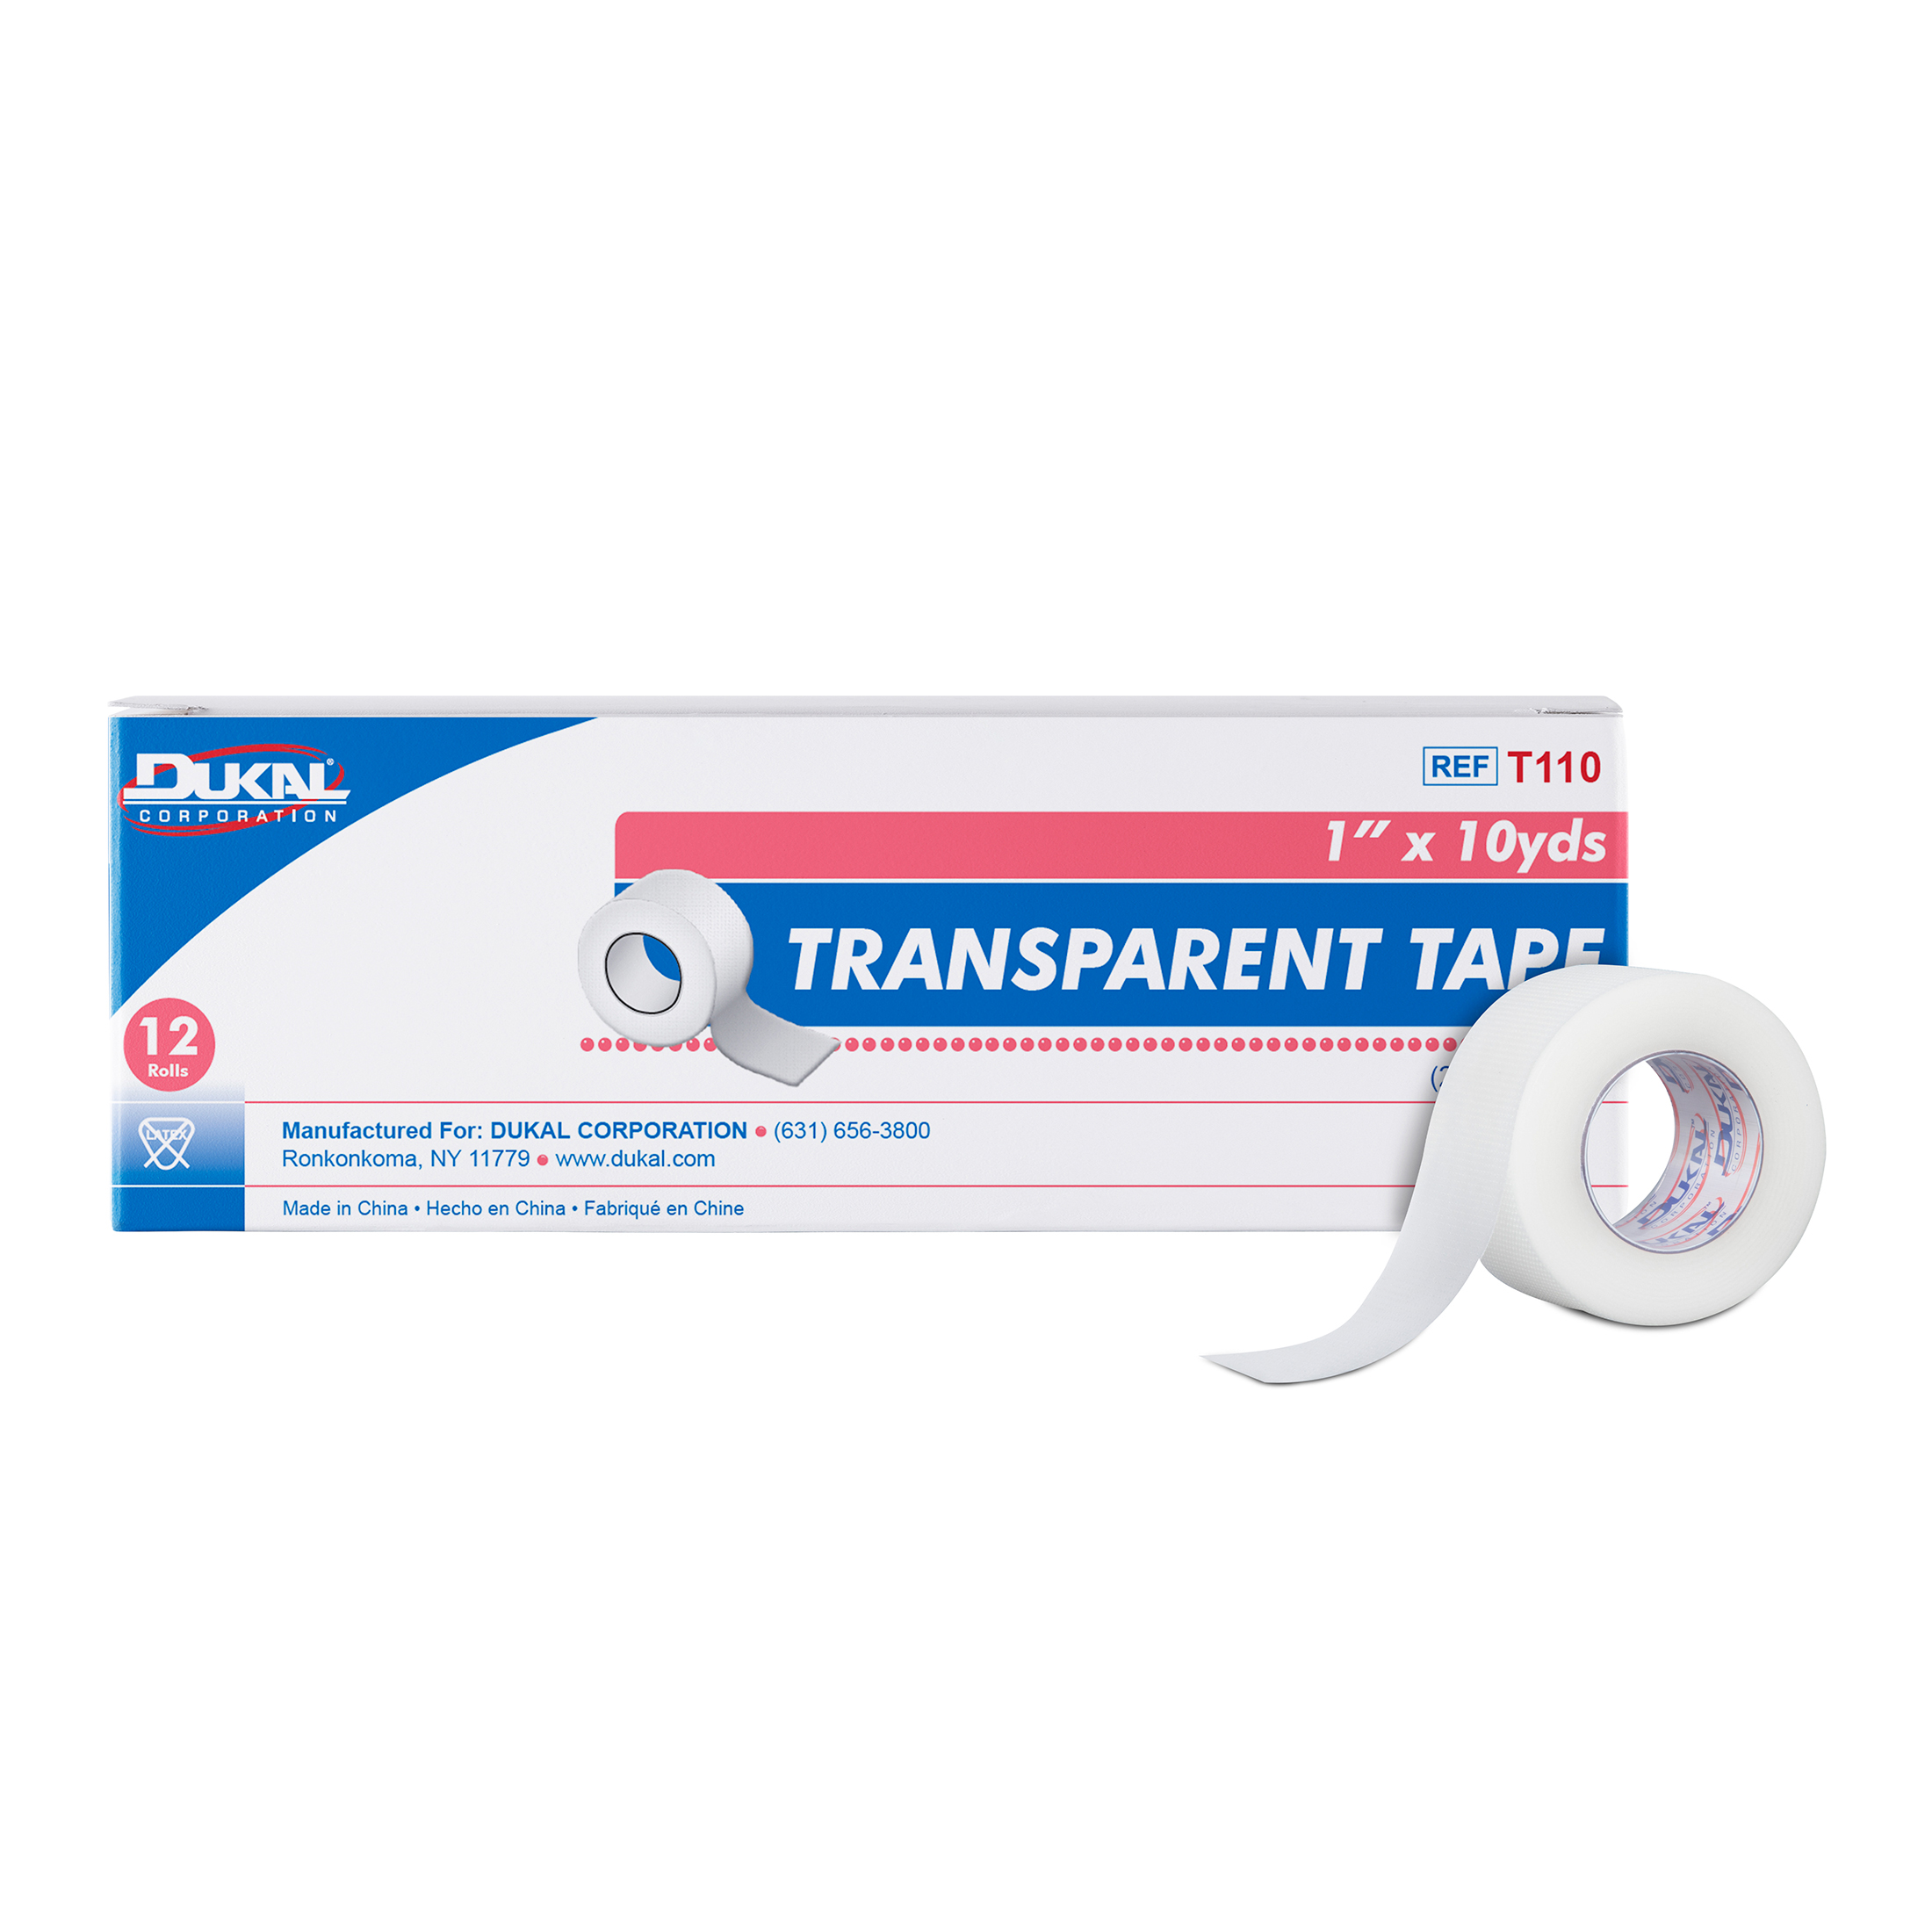 1" Transparent Surgical Tape Products, Supplies and Equipment